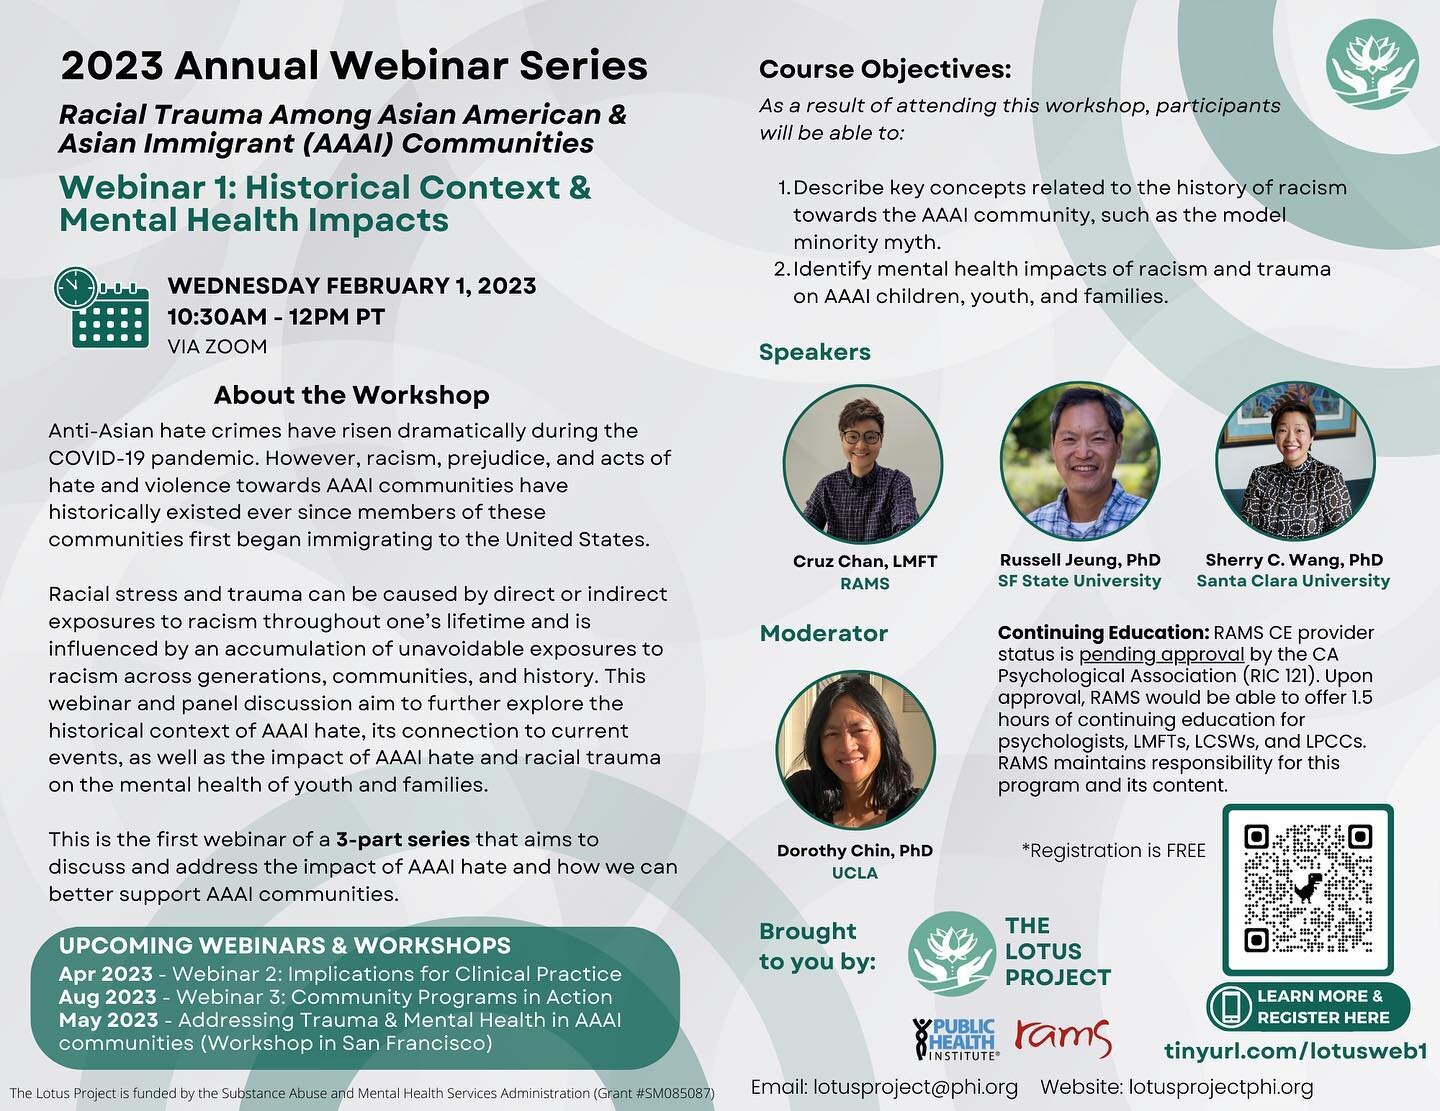 The Lotus Project is excited to present the first webinar of our 3-part webinar series addressing Racial Trauma Among Asian American &amp; Asian Immigrant (AAAI) Communities. 

Webinar 1: Historical Context &amp; Mental Health Impacts will take place